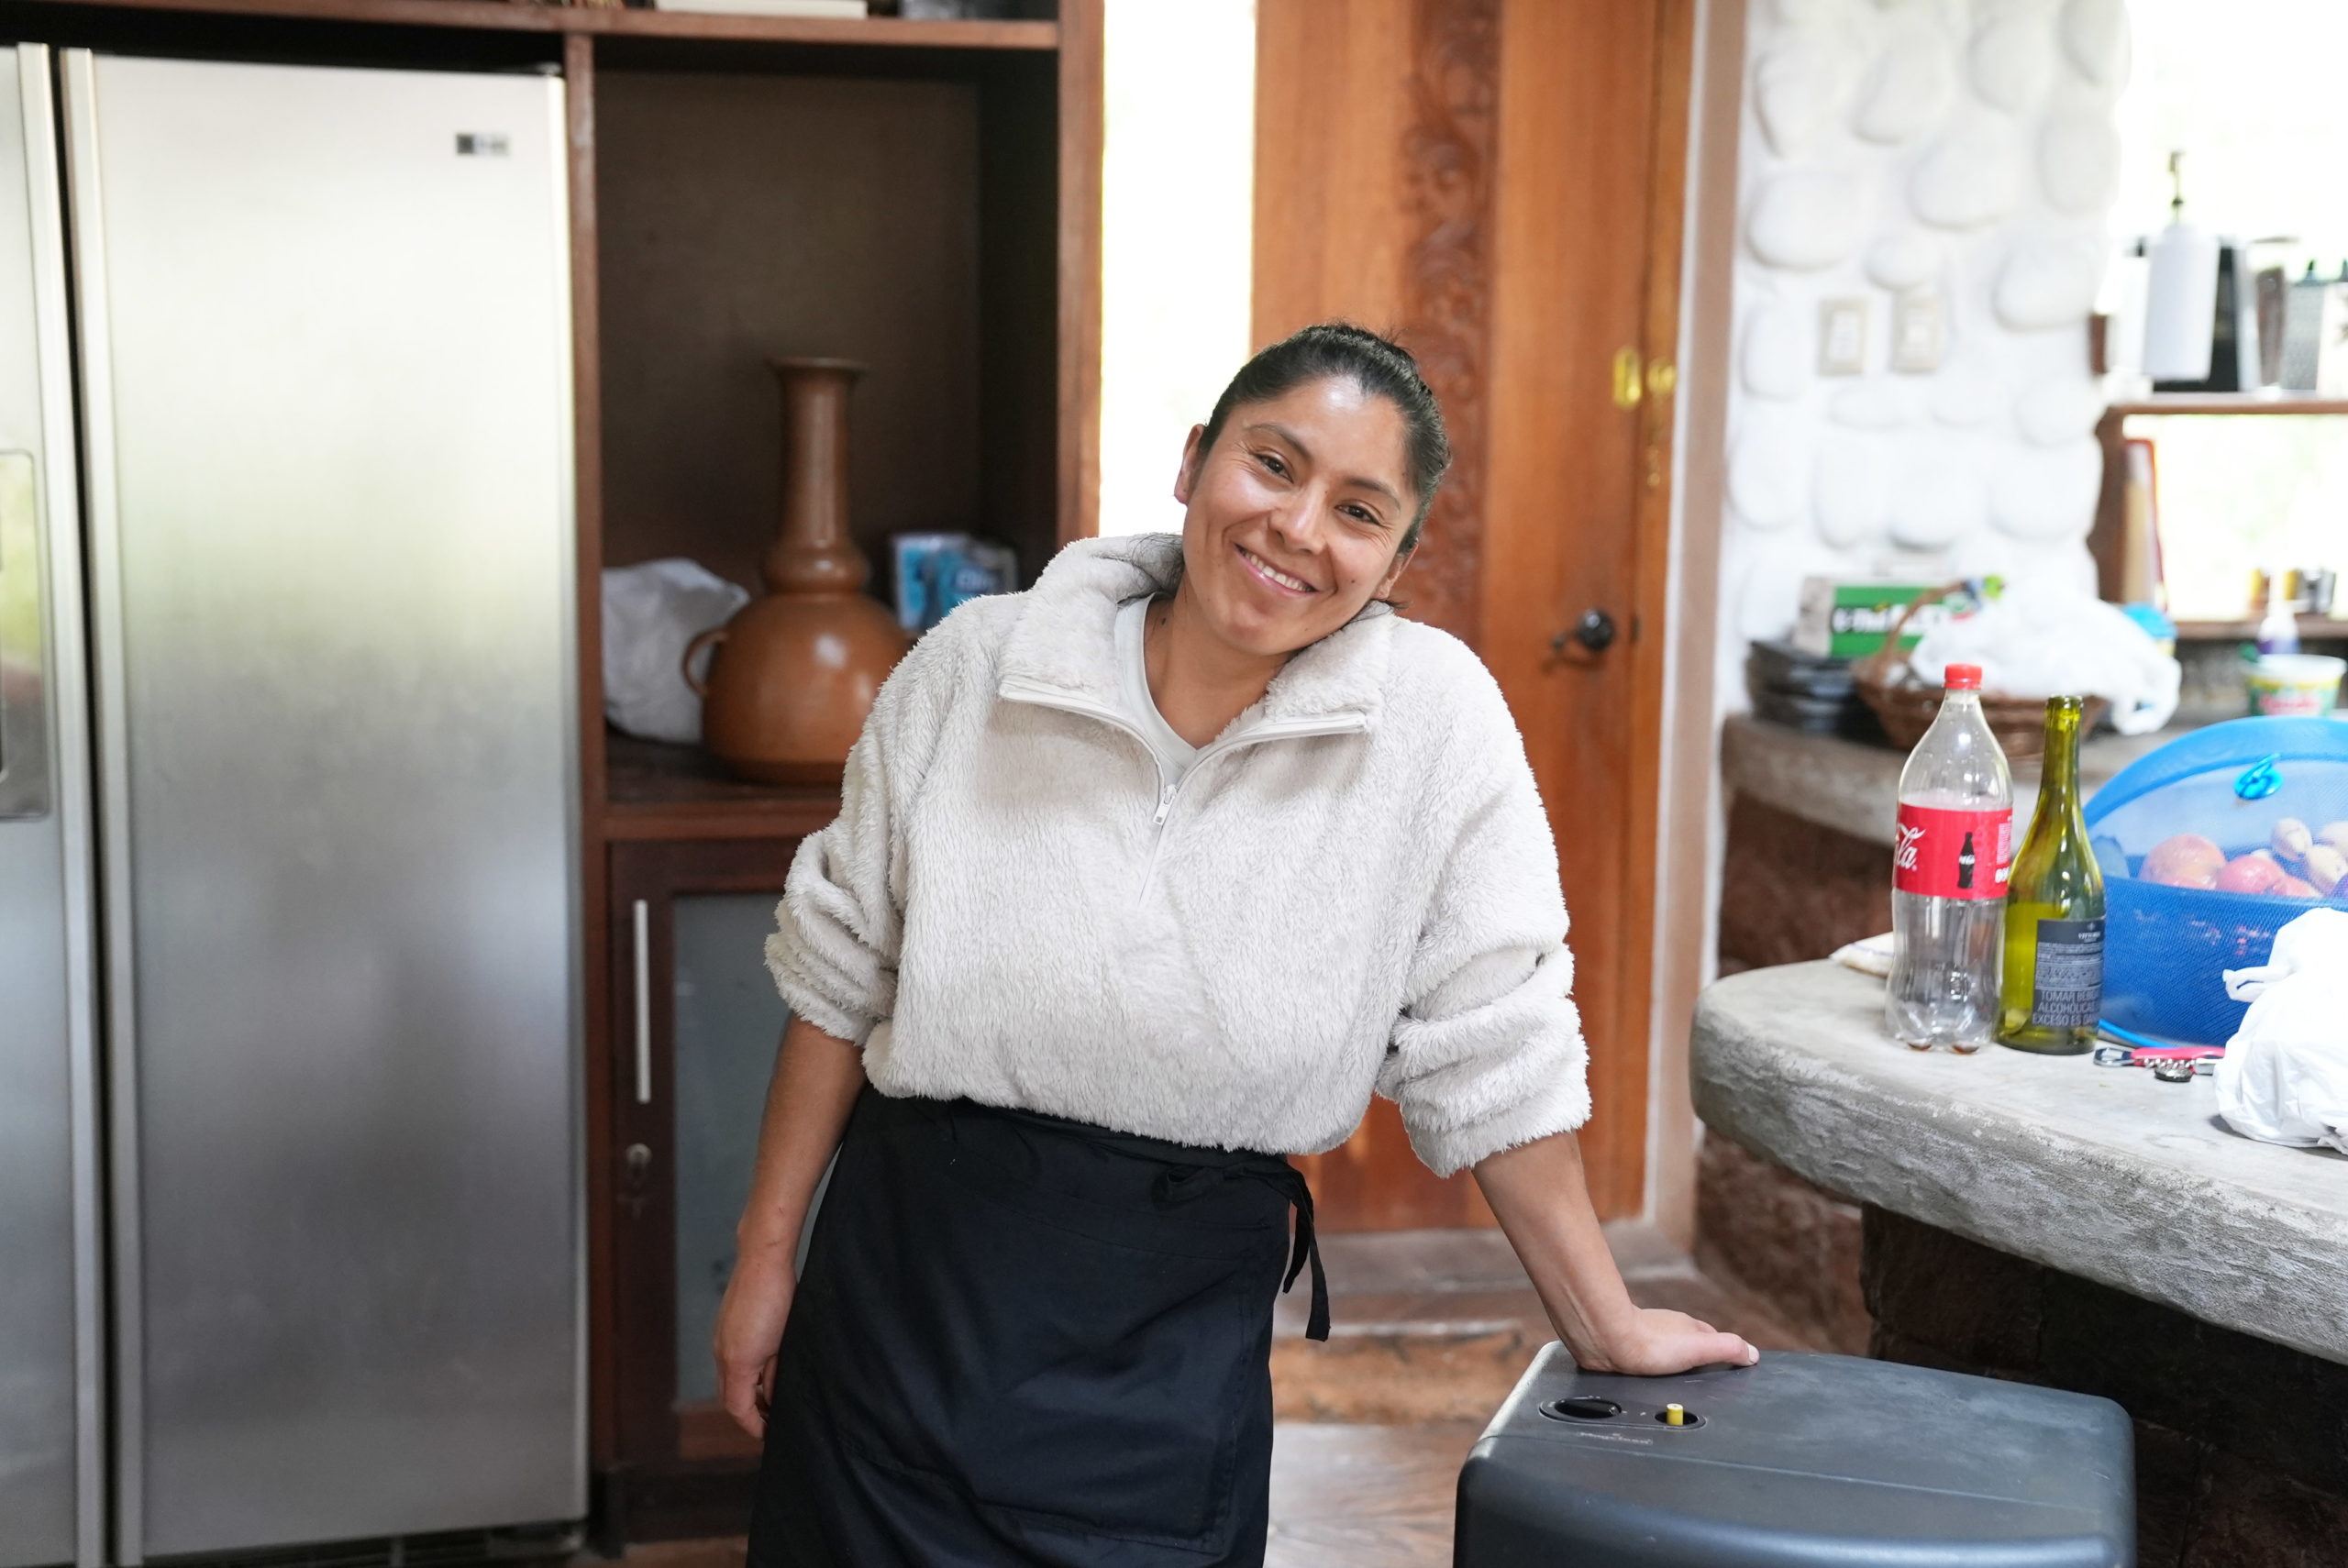 Our friendly cook, Sharme.